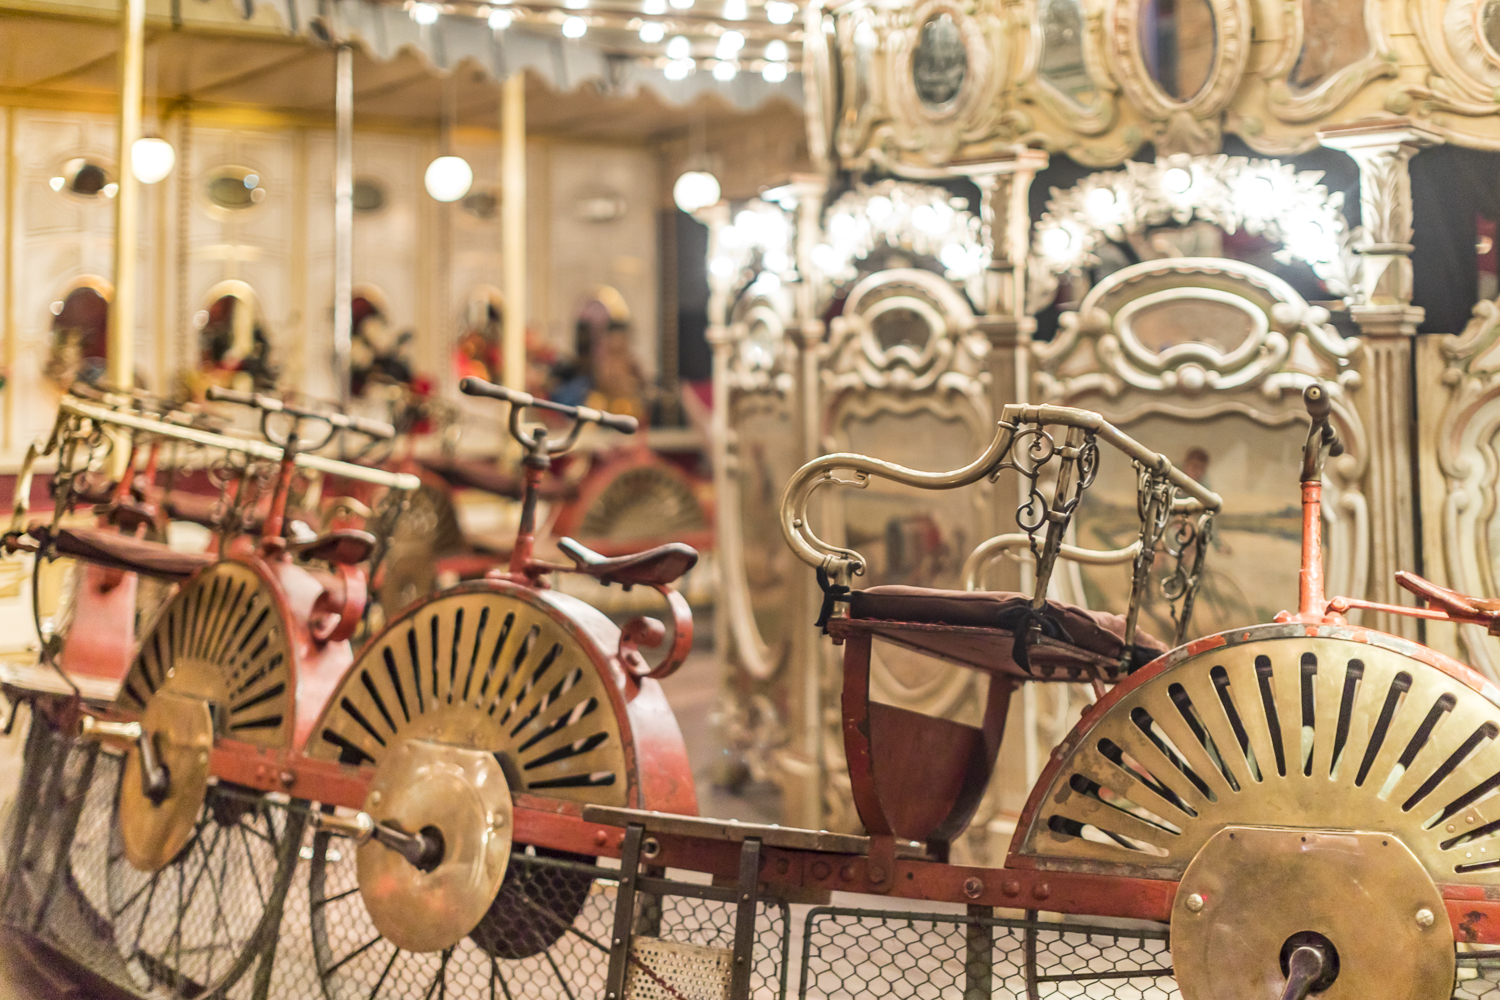  Our guide explained that there were many who could not afford the powered carousels and this was an alternative. The explanatory notes in the program add that in the early days of pedal power there were more bicycles in the fairgrounds than on the s